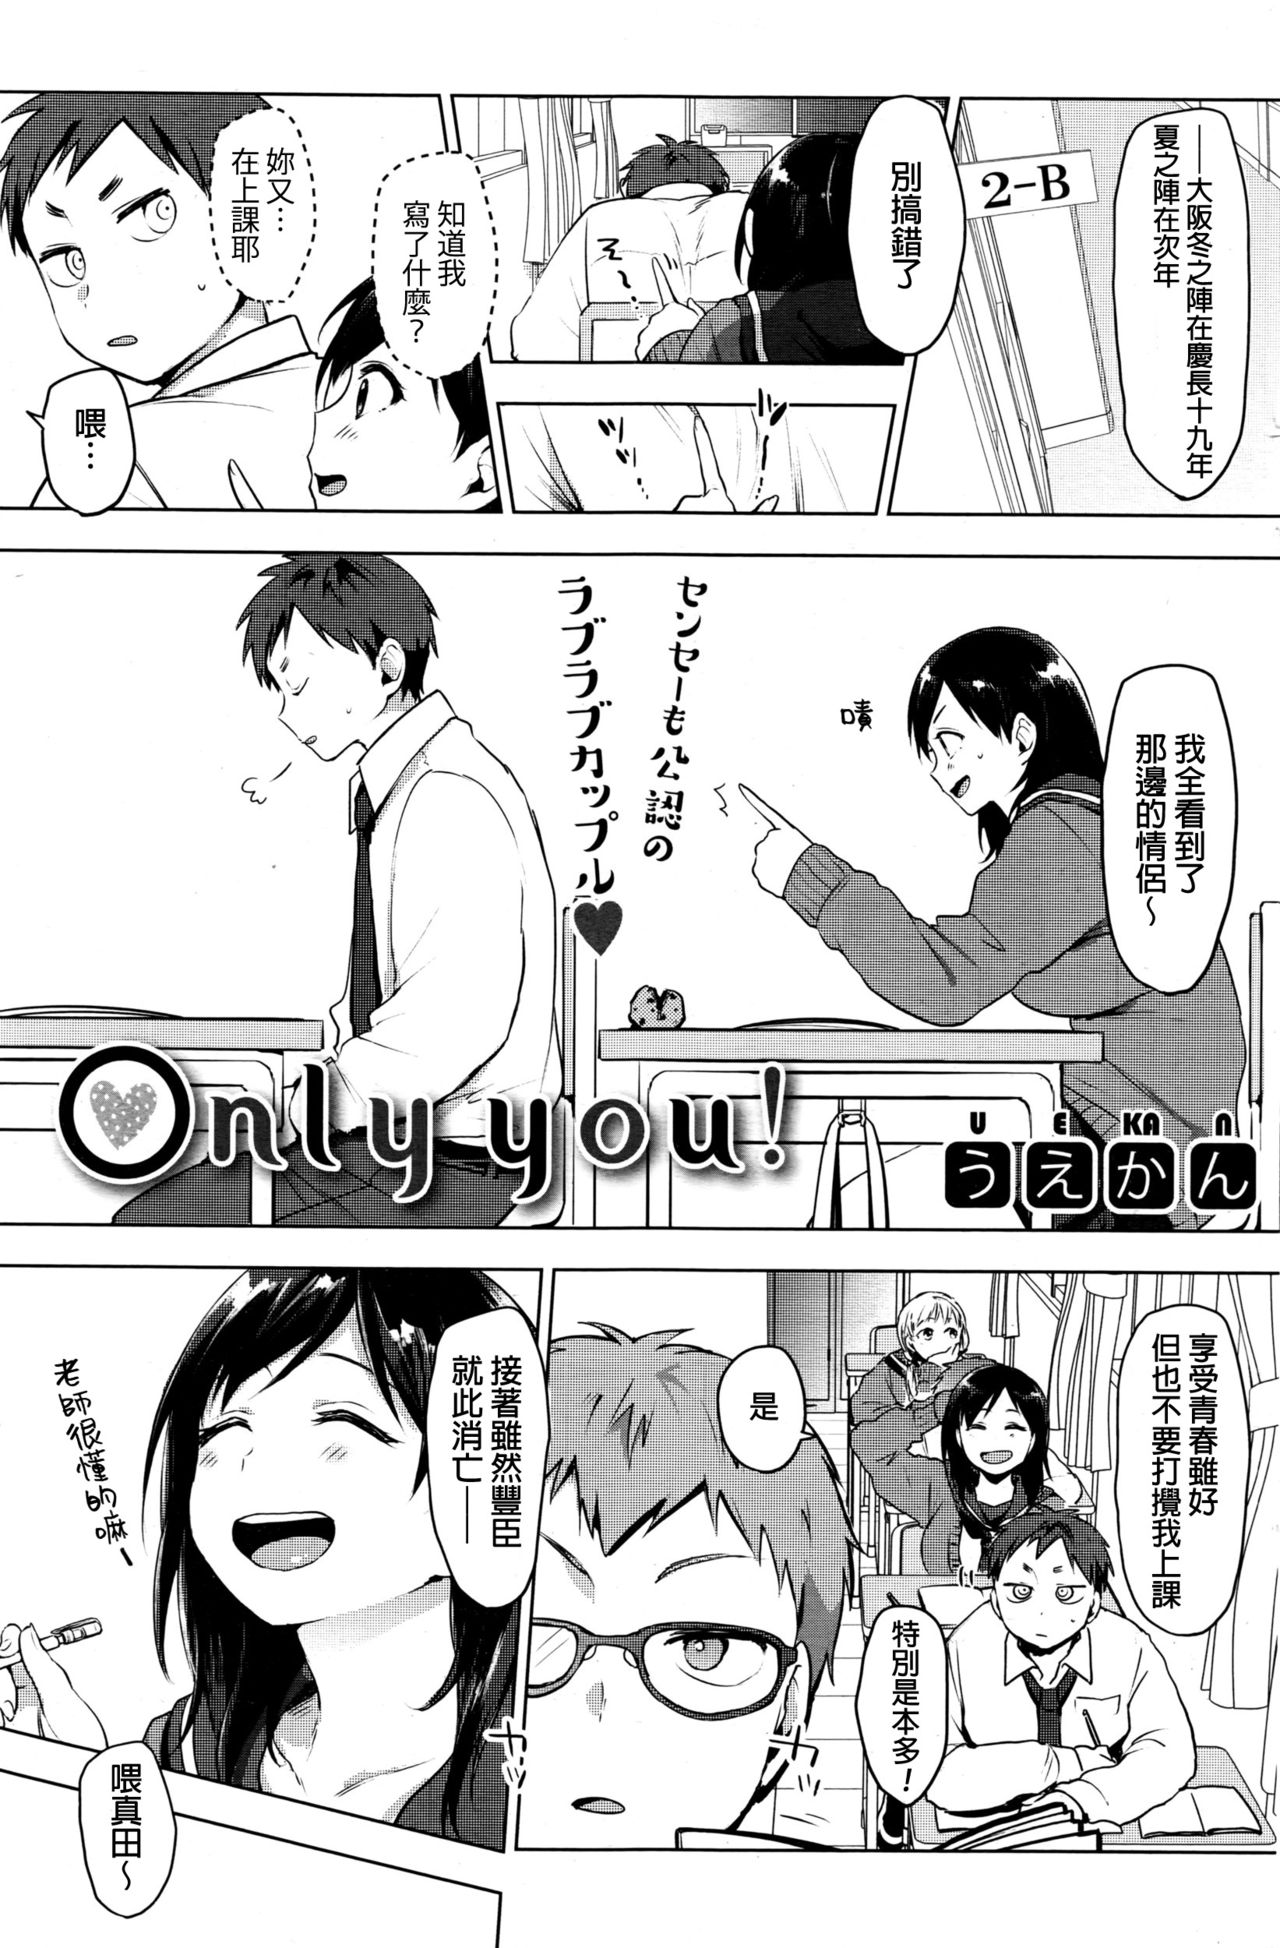 [Uekan] only you! (COMIC HOTMILK 2016-11) [Chinese] [うえかん] only you！ (コミックホットミルク 2016年11月号) [中文翻譯]